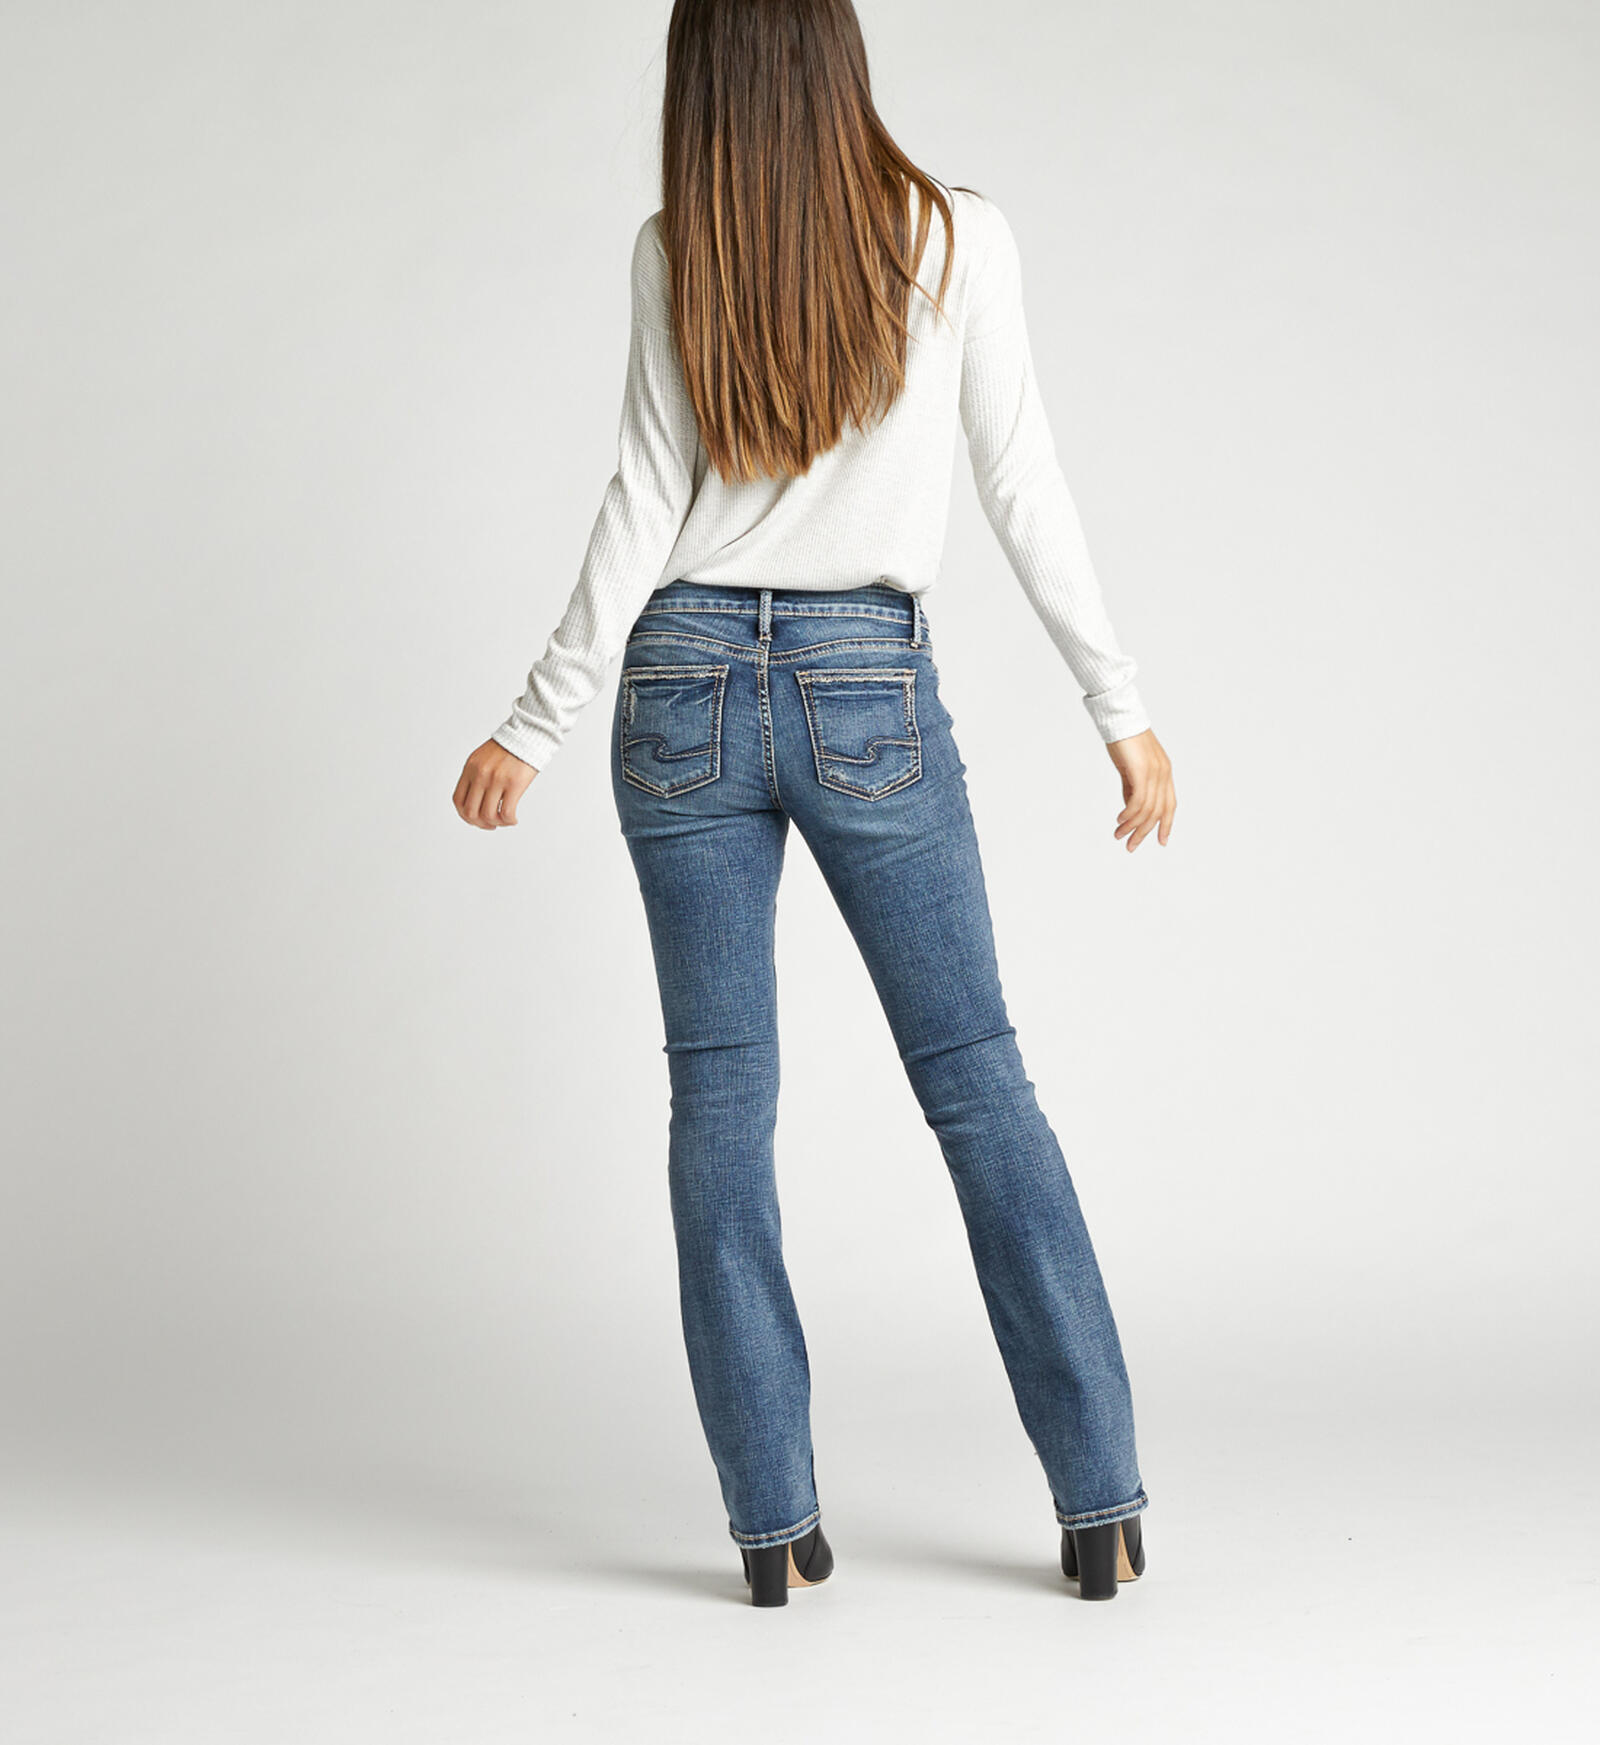 Silver Jeans Co. Women's Size Elyse Mid Rise Slim Bootcut Jeans, Med Wash  Ecf291, 12 Plus Short at  Women's Jeans store